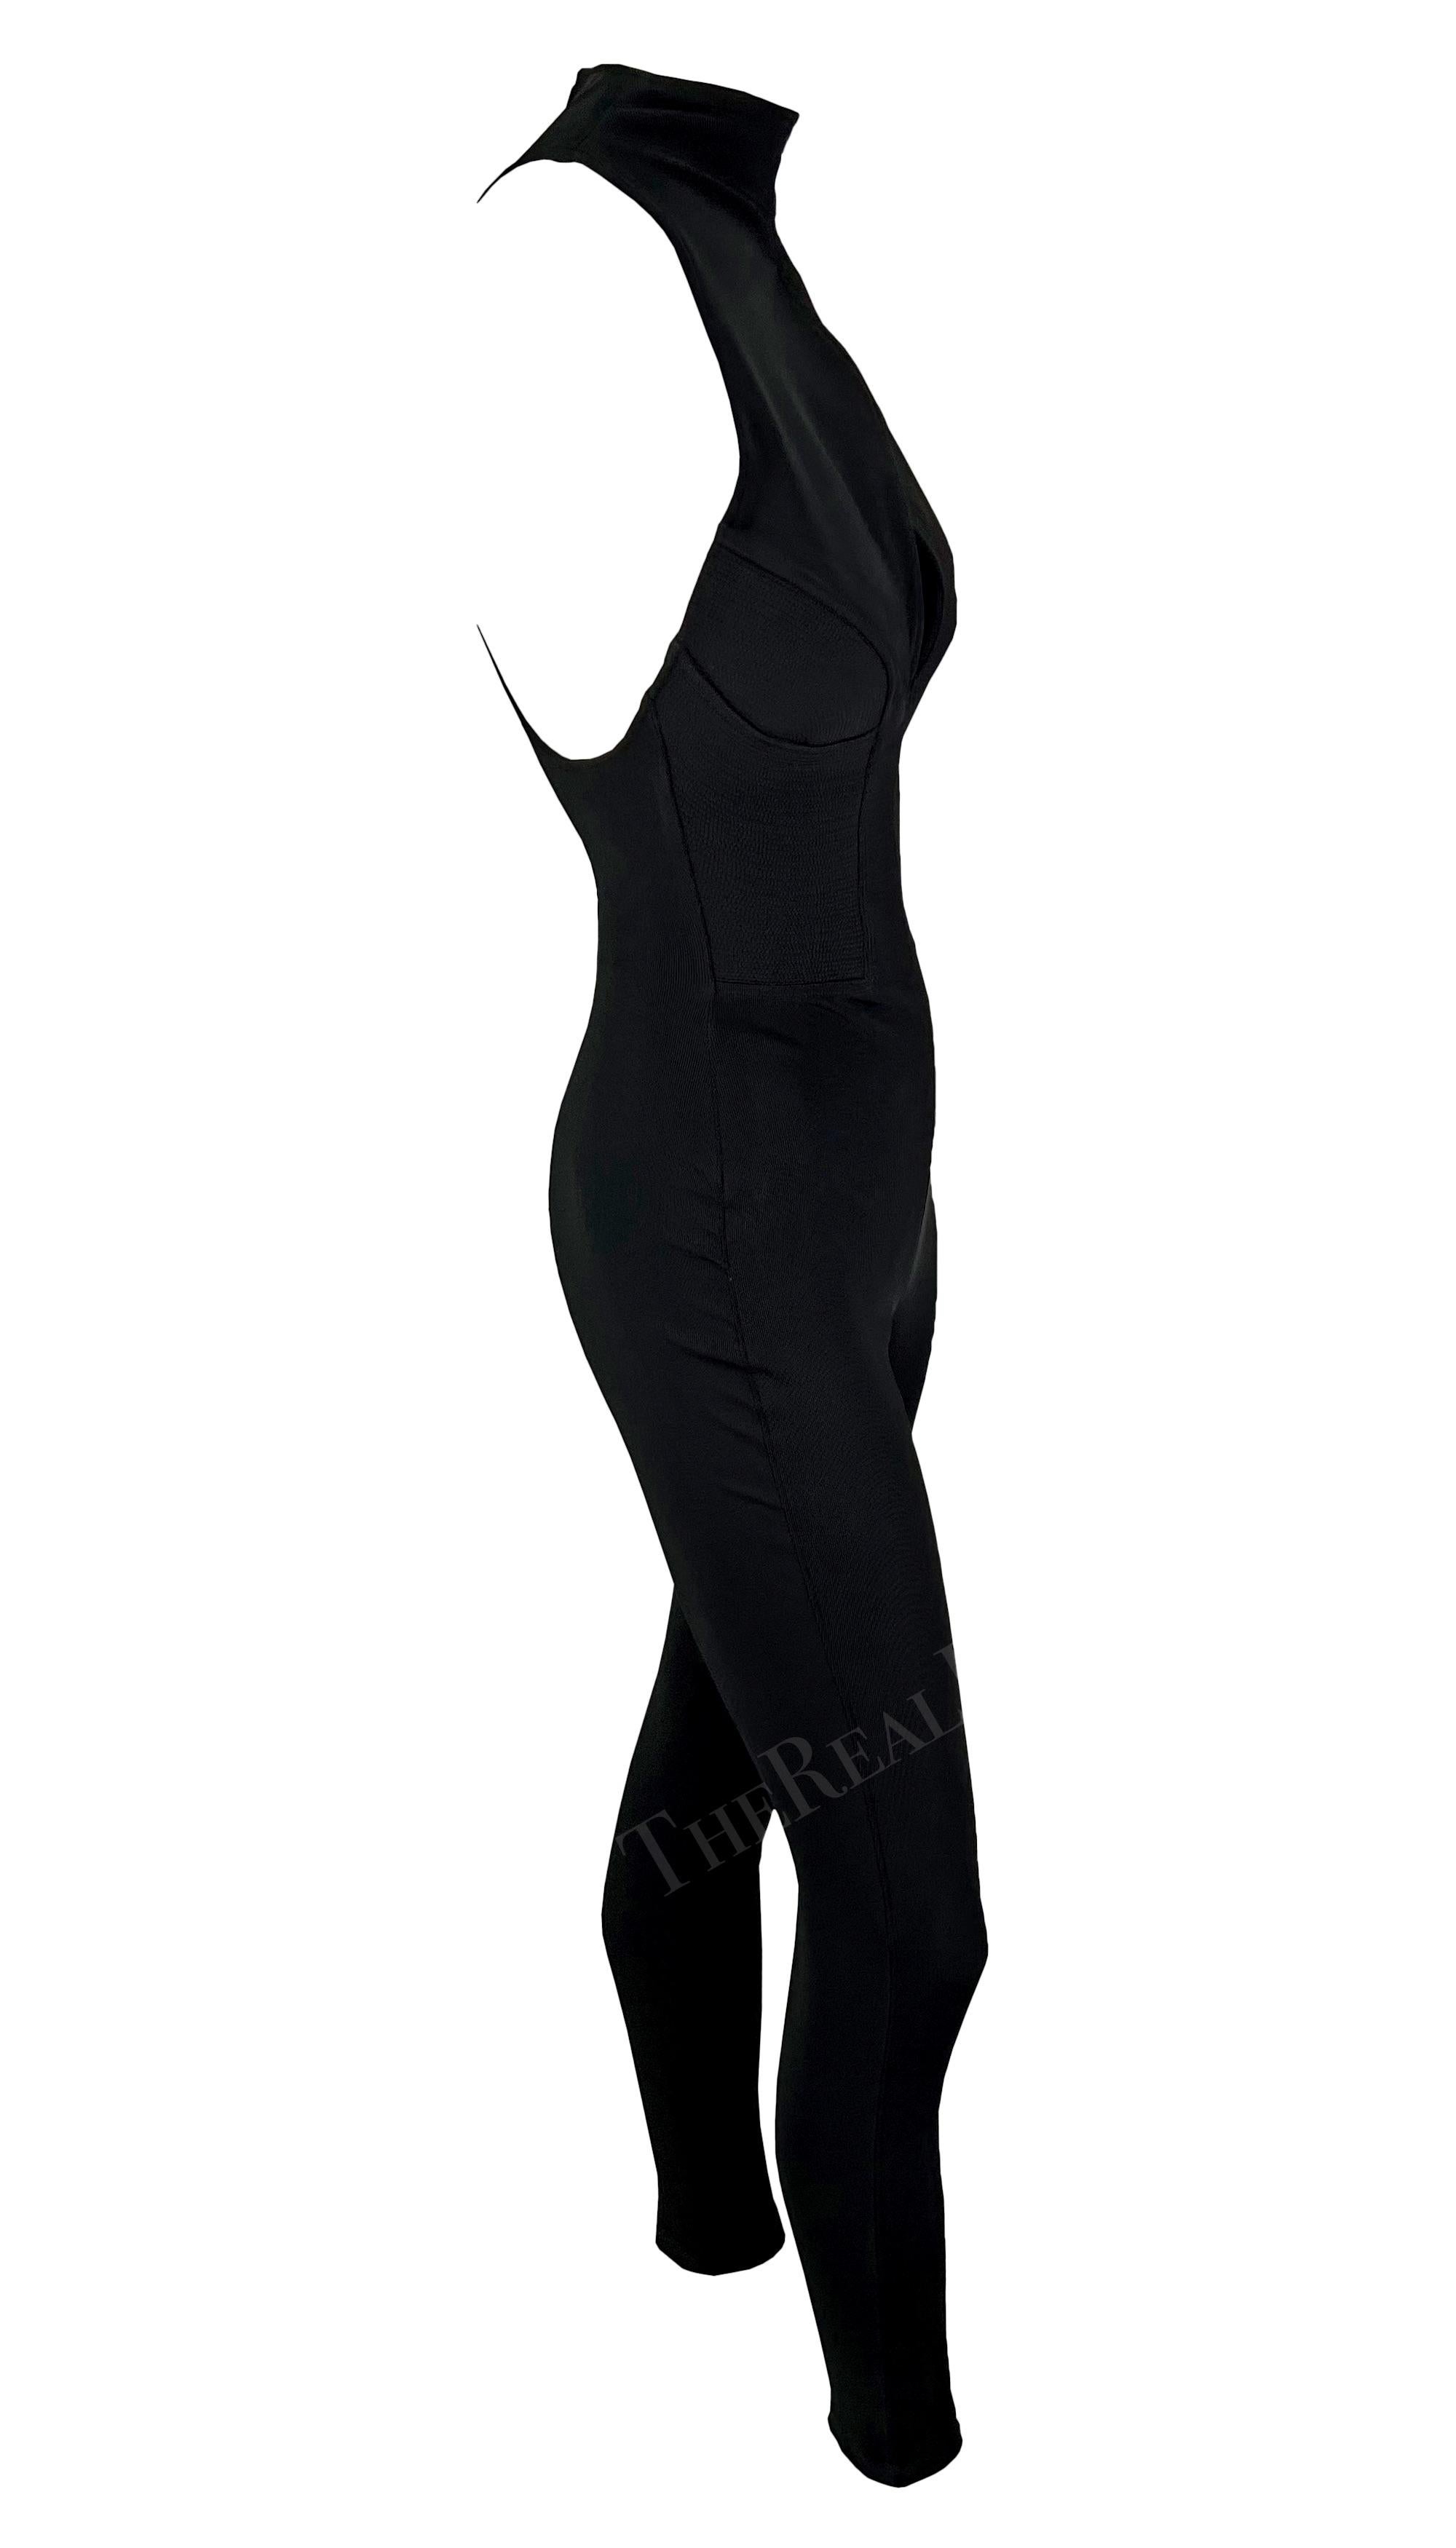 F/W 1991 Gianni Versace Runway Sleeveless Stretch Bodycon Ribbed Black Catsuit 5